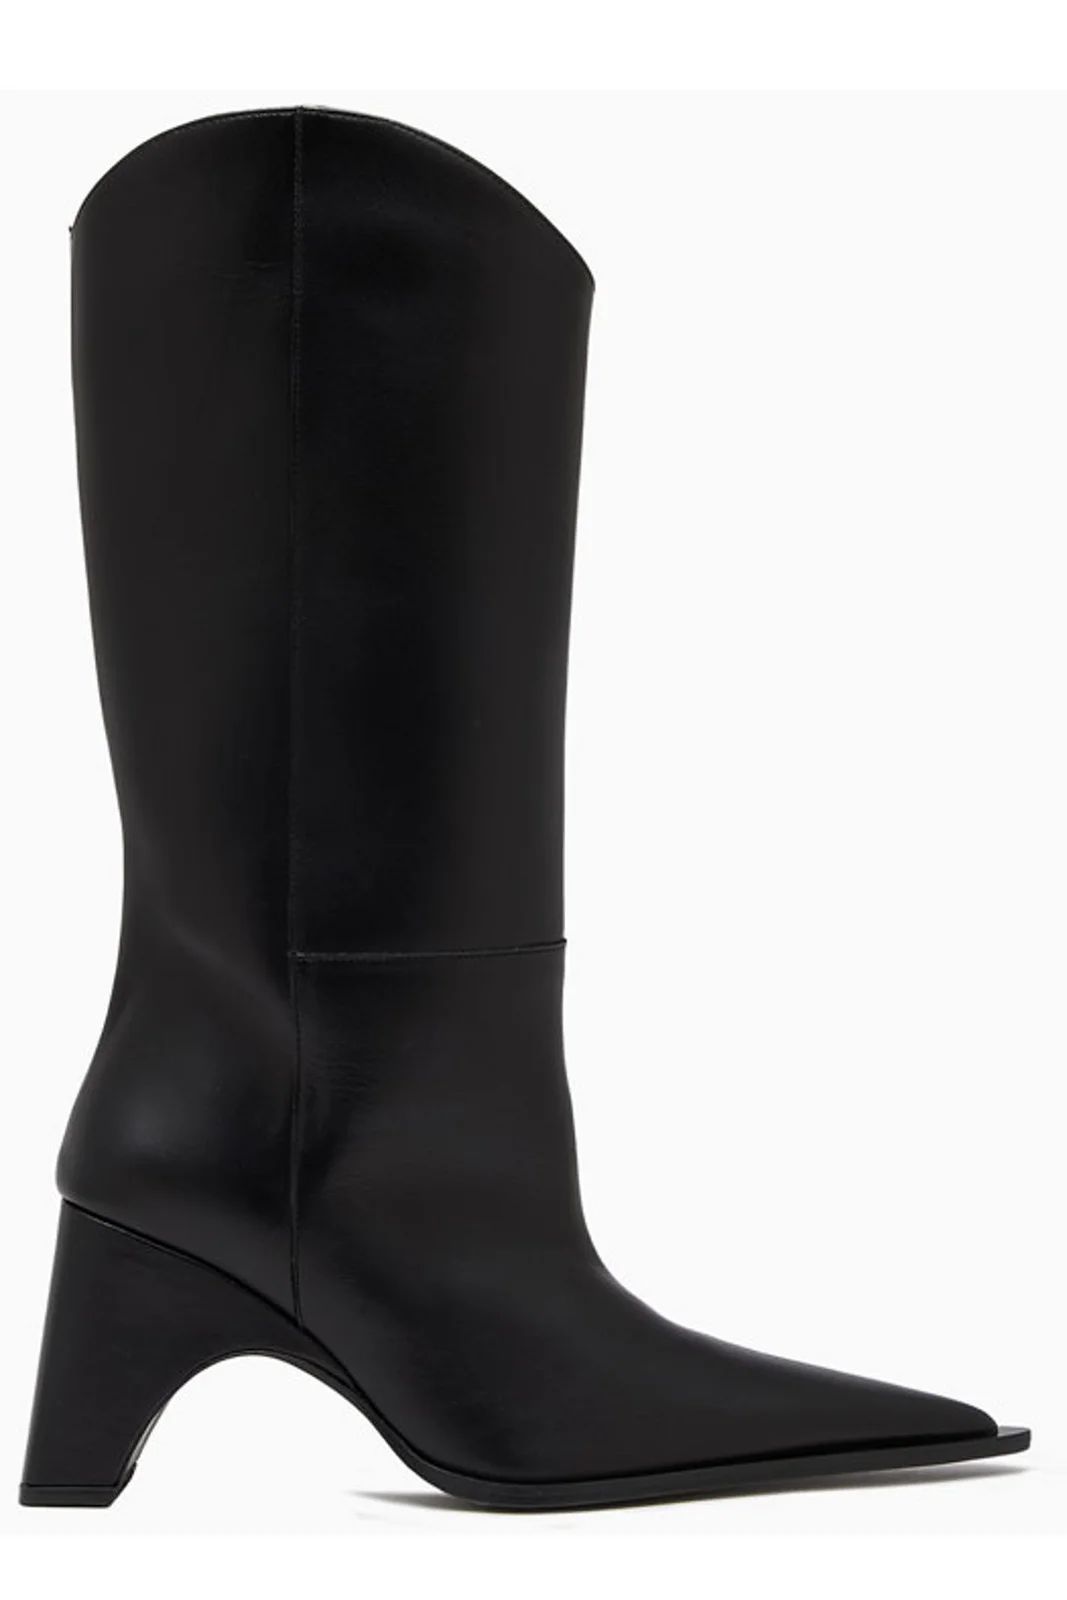 Coperni Cowboy Pointed Toe Boots | Cettire Global